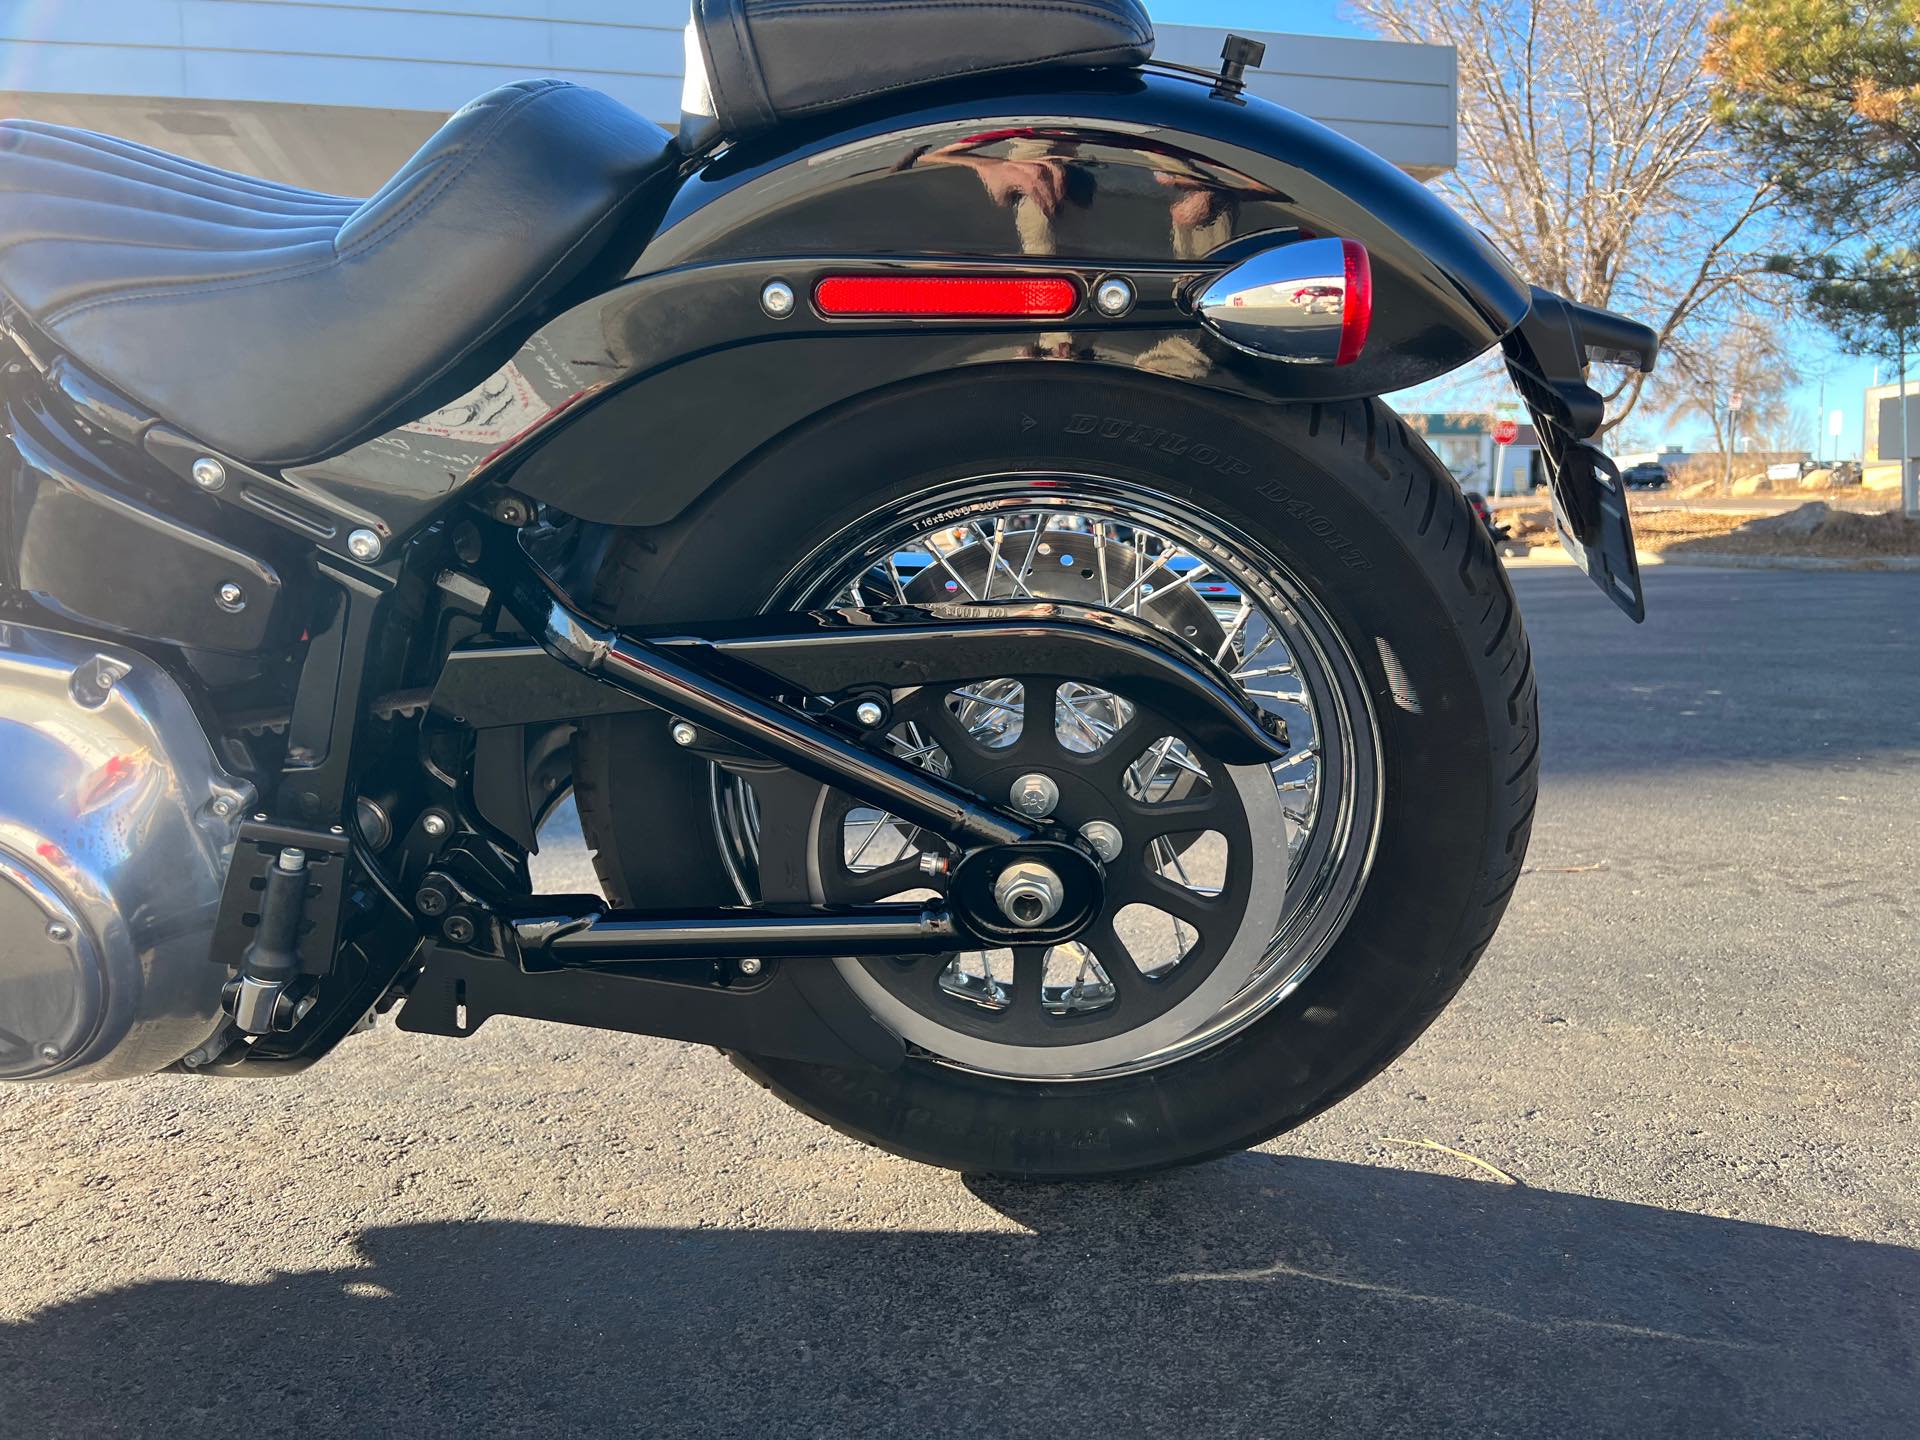 2021 Harley-Davidson FXST at Aces Motorcycles - Fort Collins